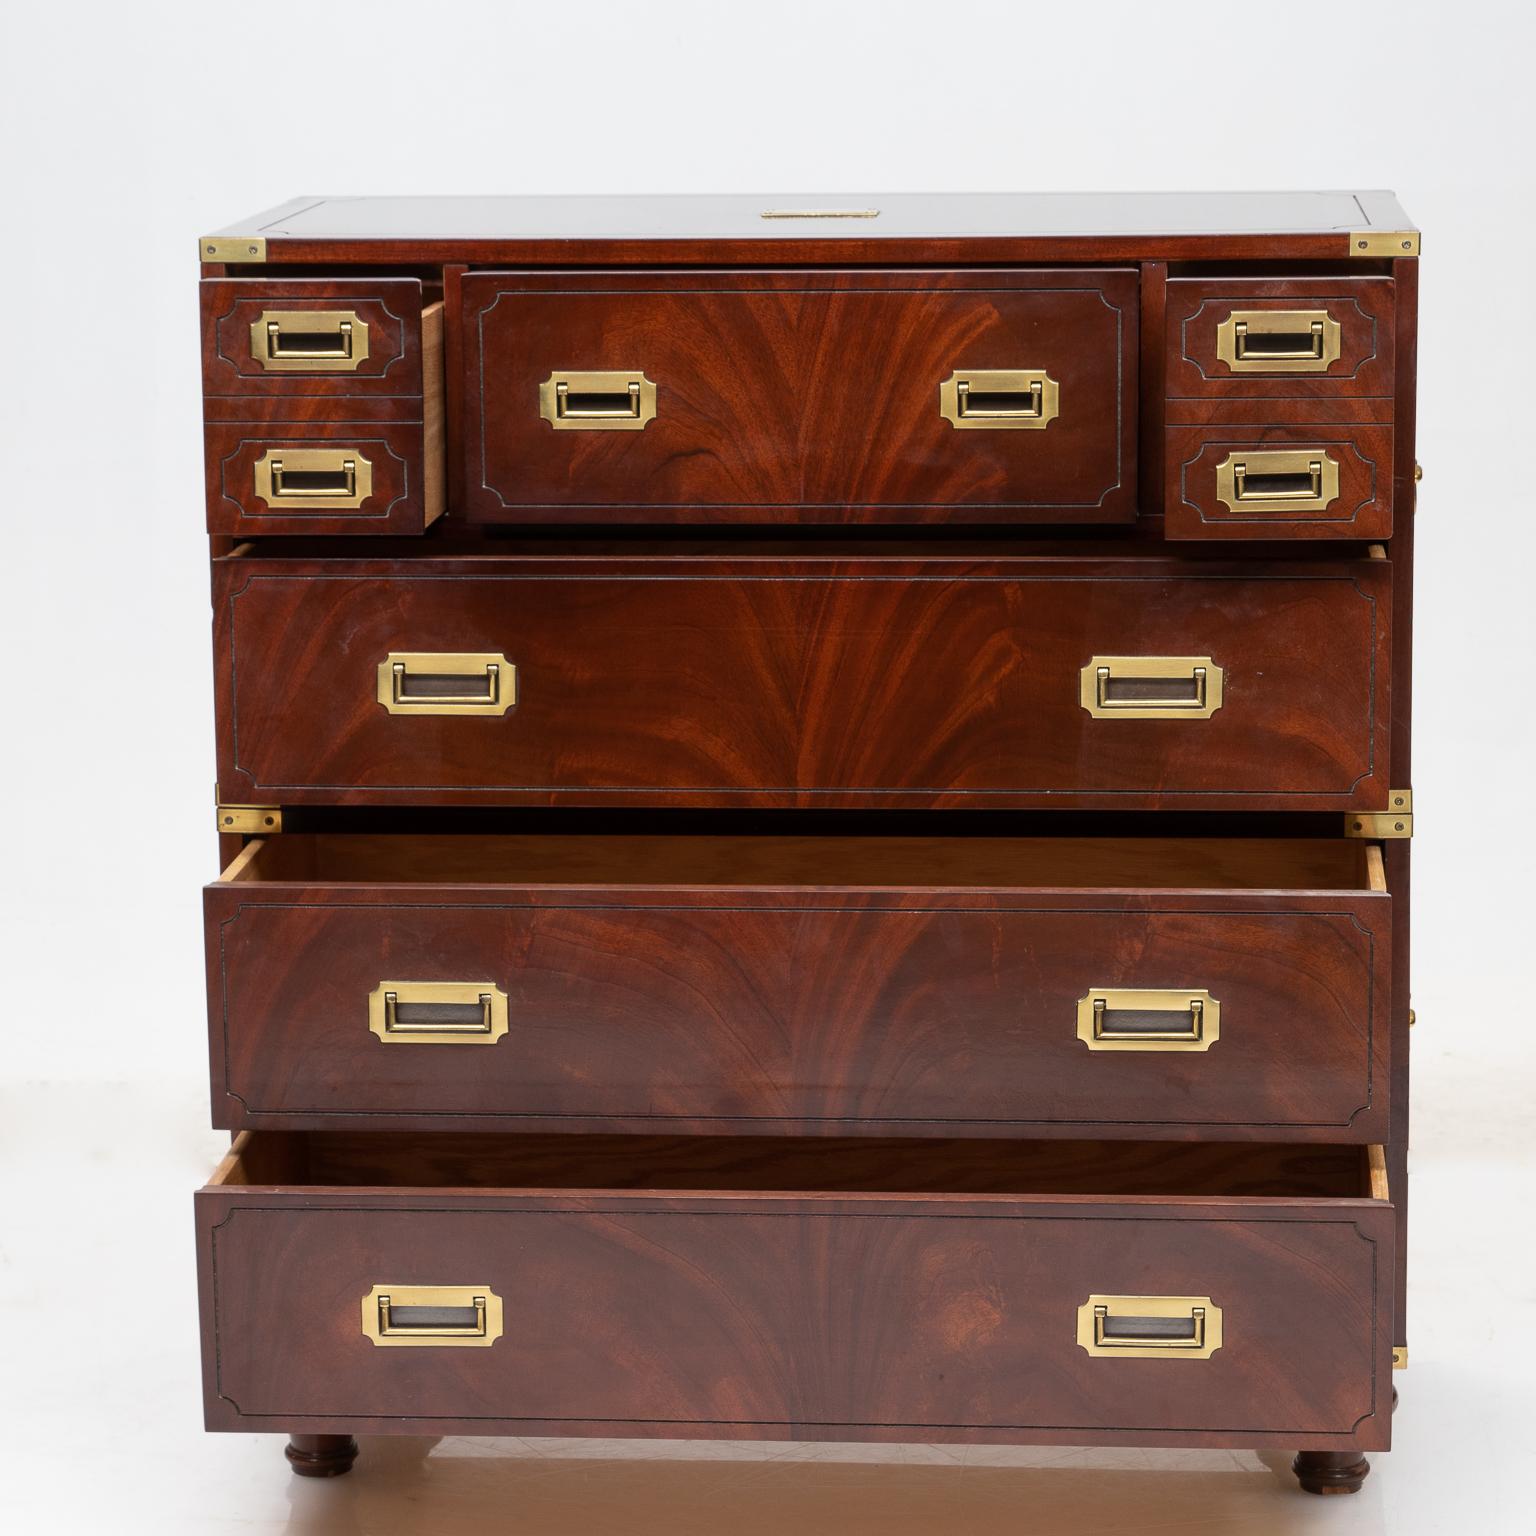 Mahogany campaign style chest of drawers with quality brass strapping, handles and an un-engraved brass plaque on the top. Beautiful flamed mahogany. Turned feet. Functions very well. Made by Hickory Chair Company.